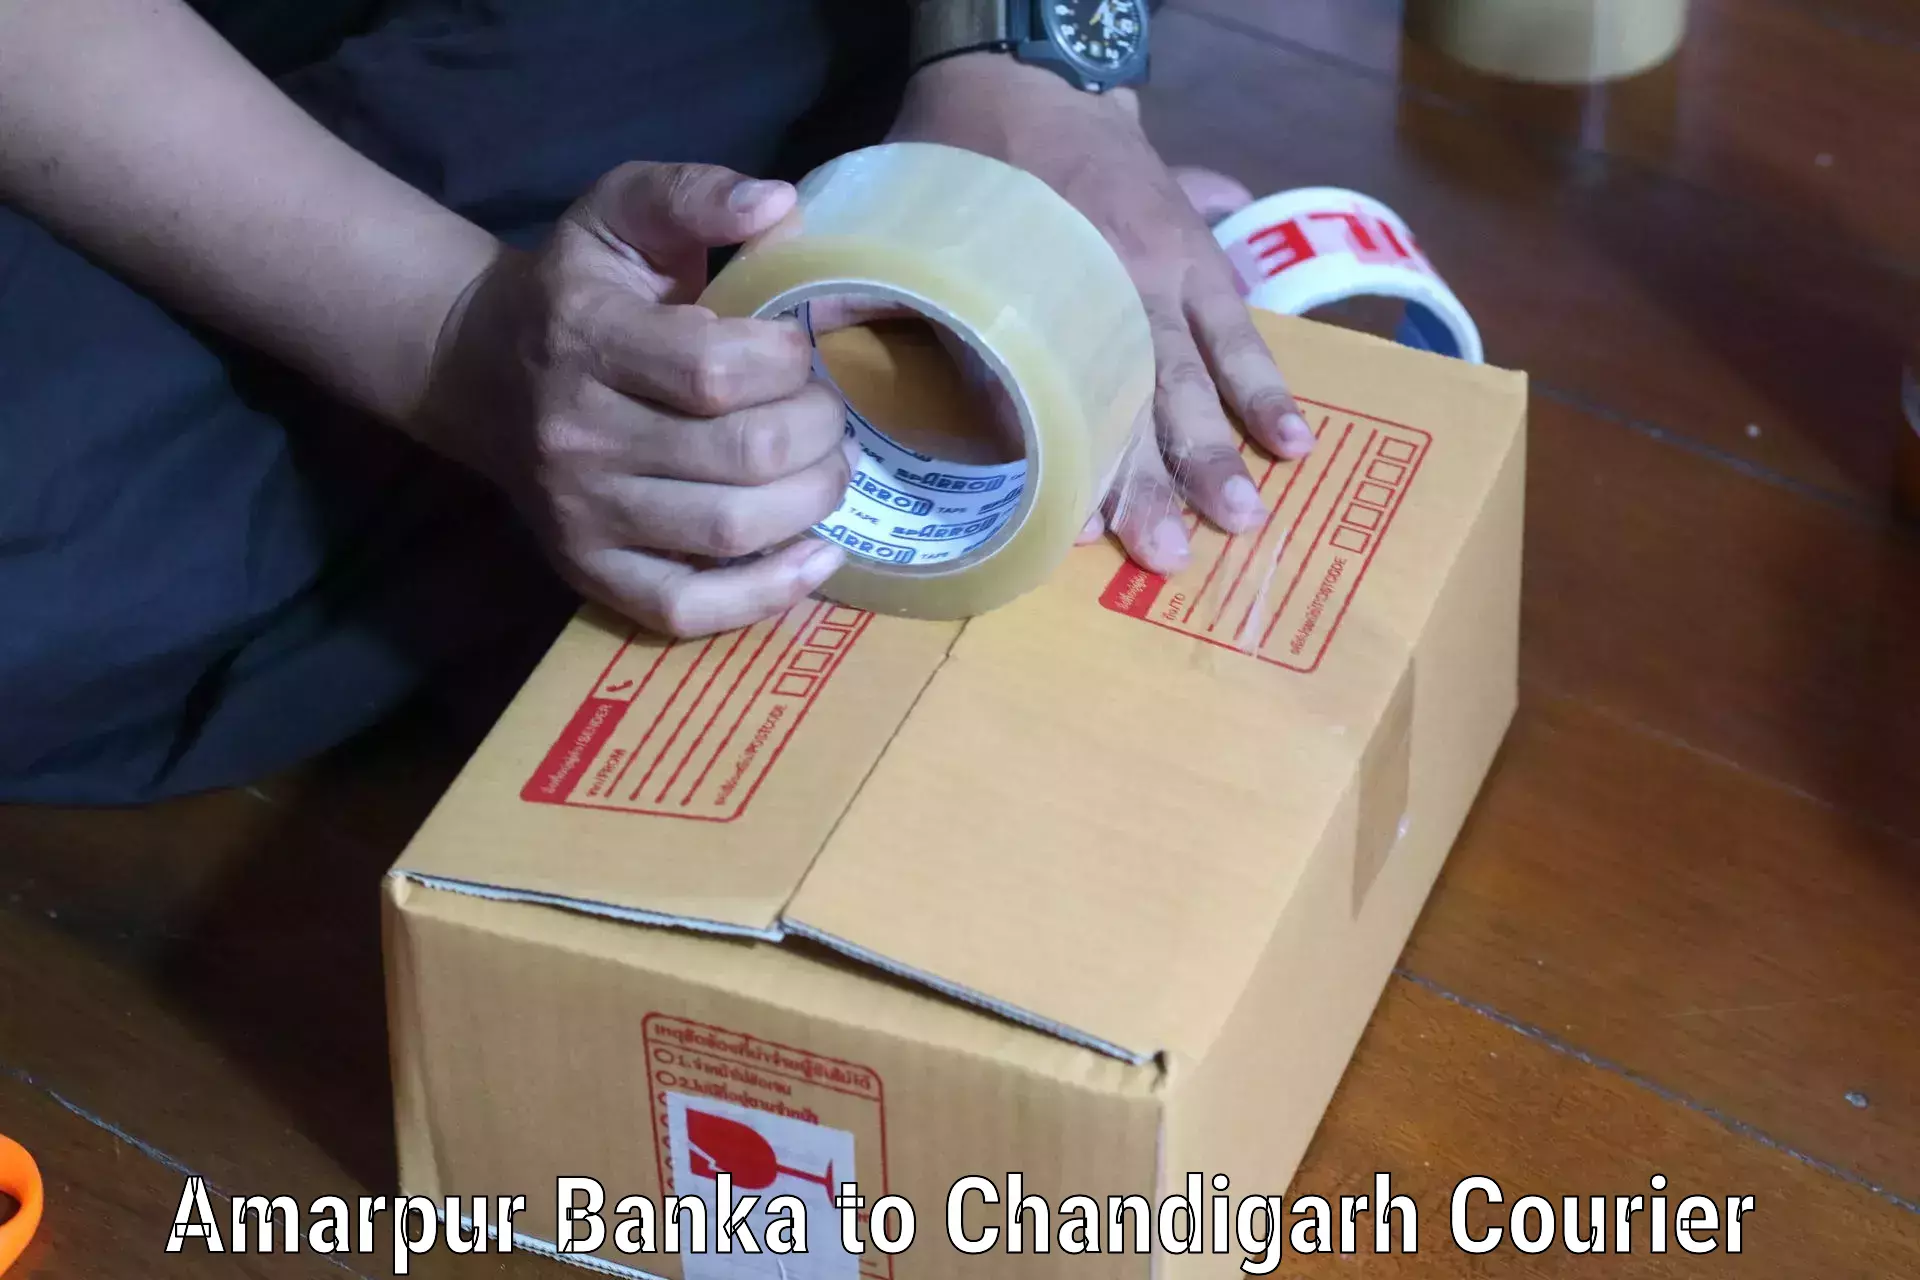 Express delivery capabilities Amarpur Banka to Chandigarh